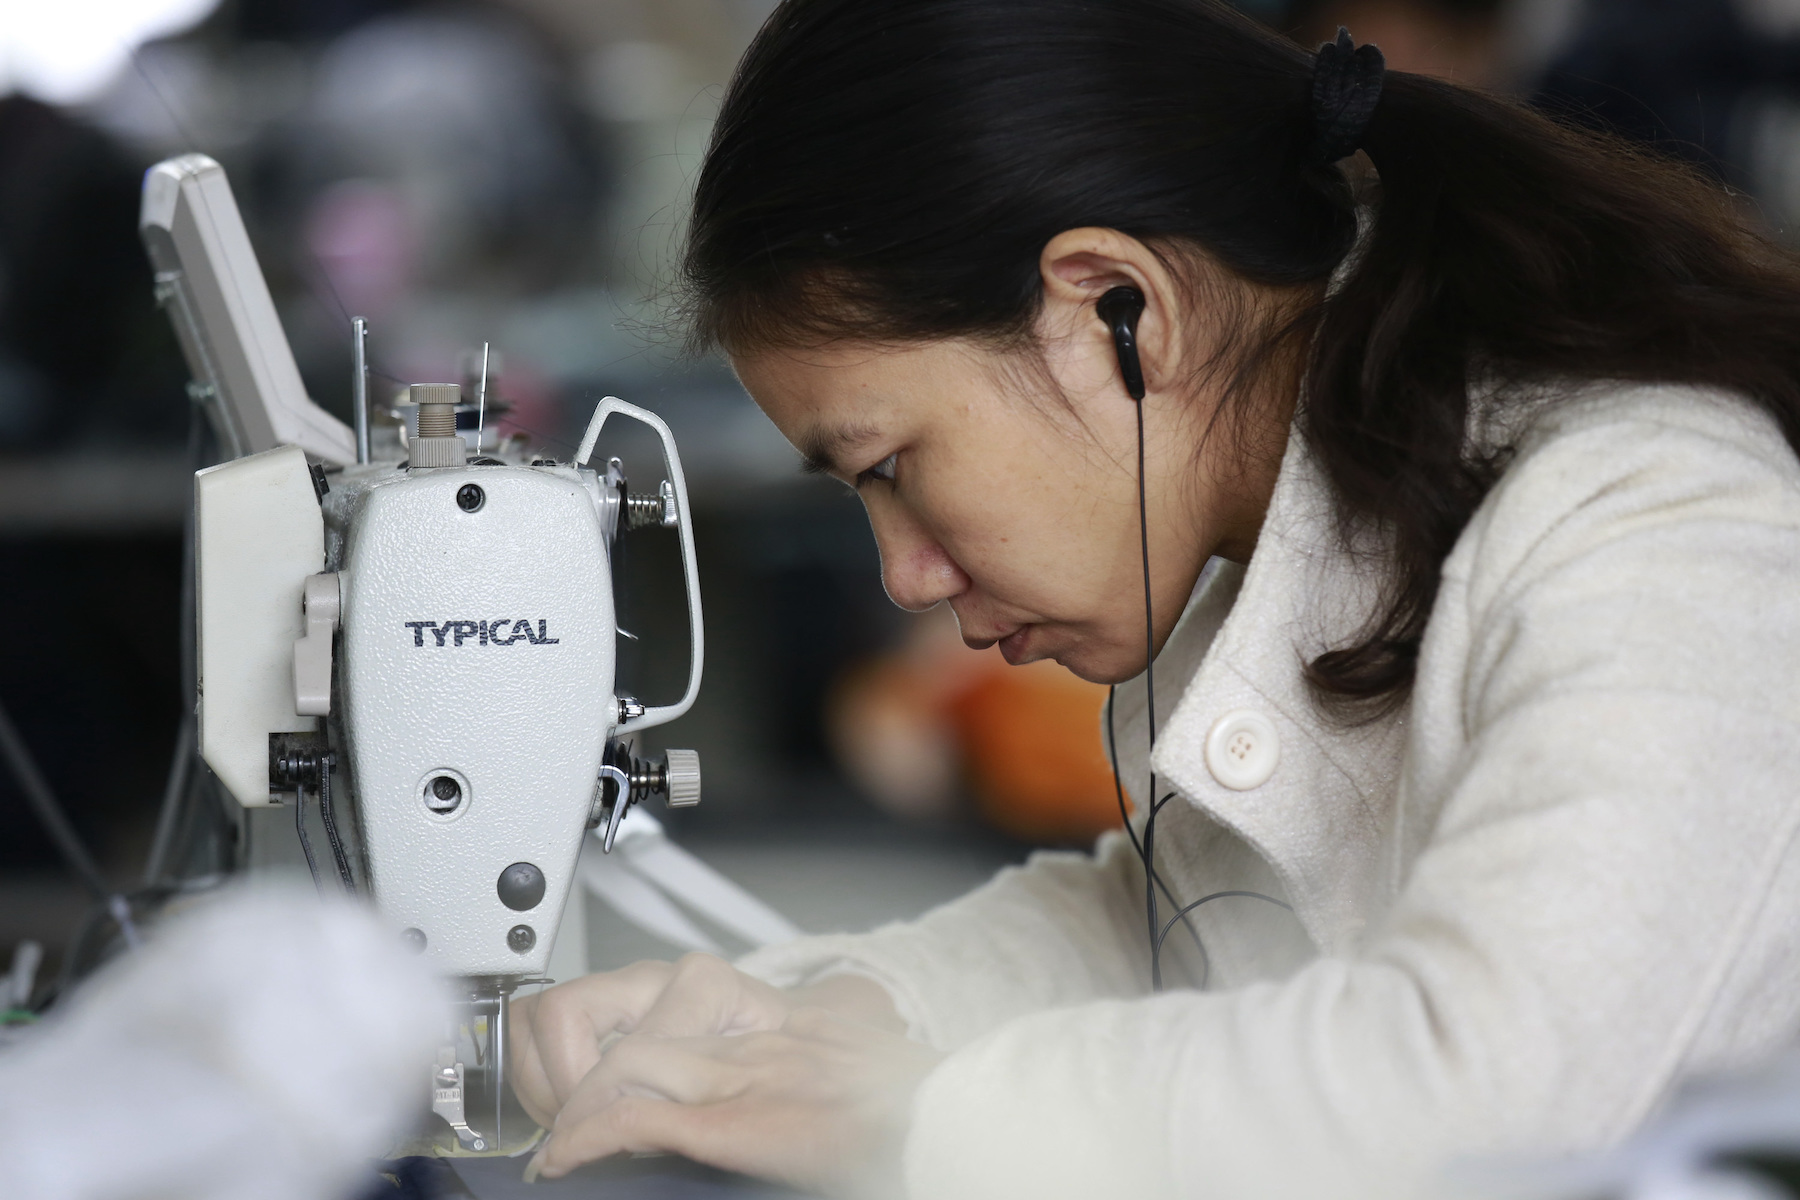 A young woman worker concentrates as she sews at a machine in a factory in China